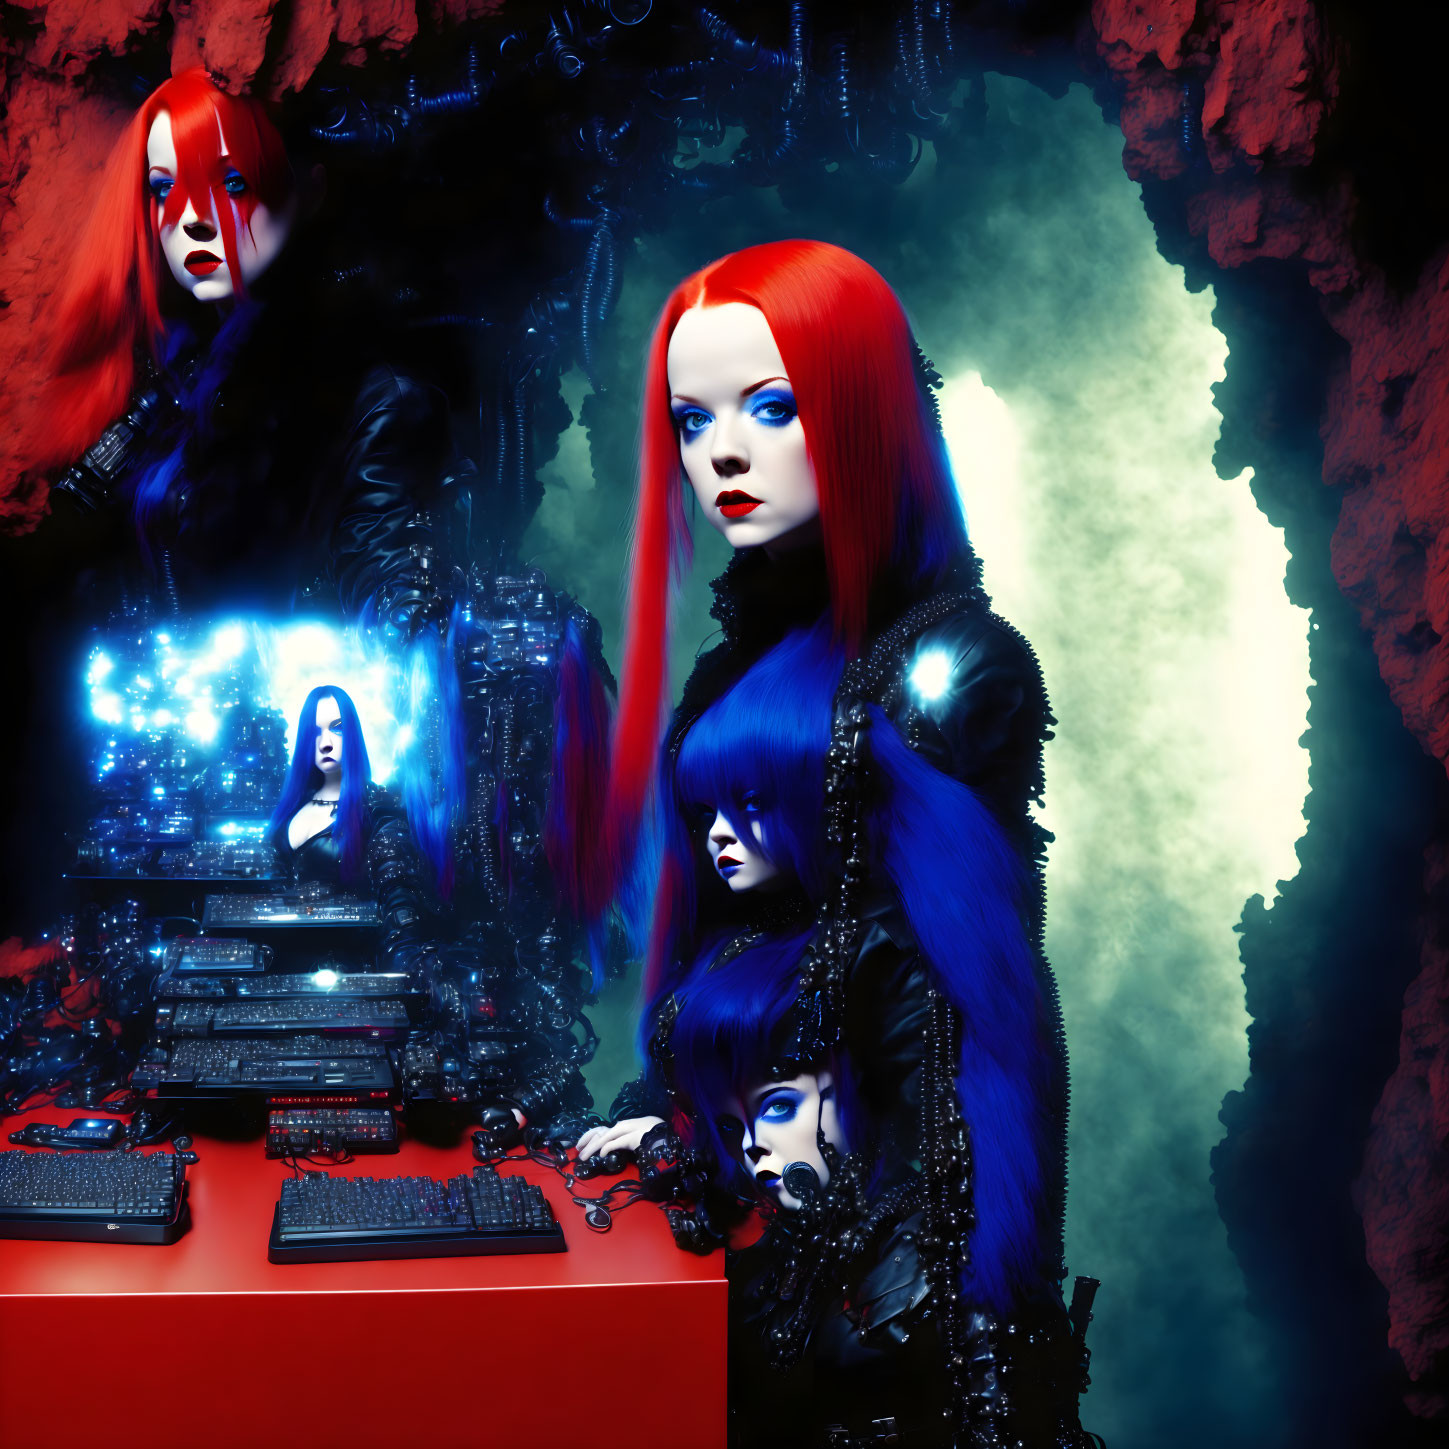 Four futuristic women with vibrant hair in a red and blue lit control room.